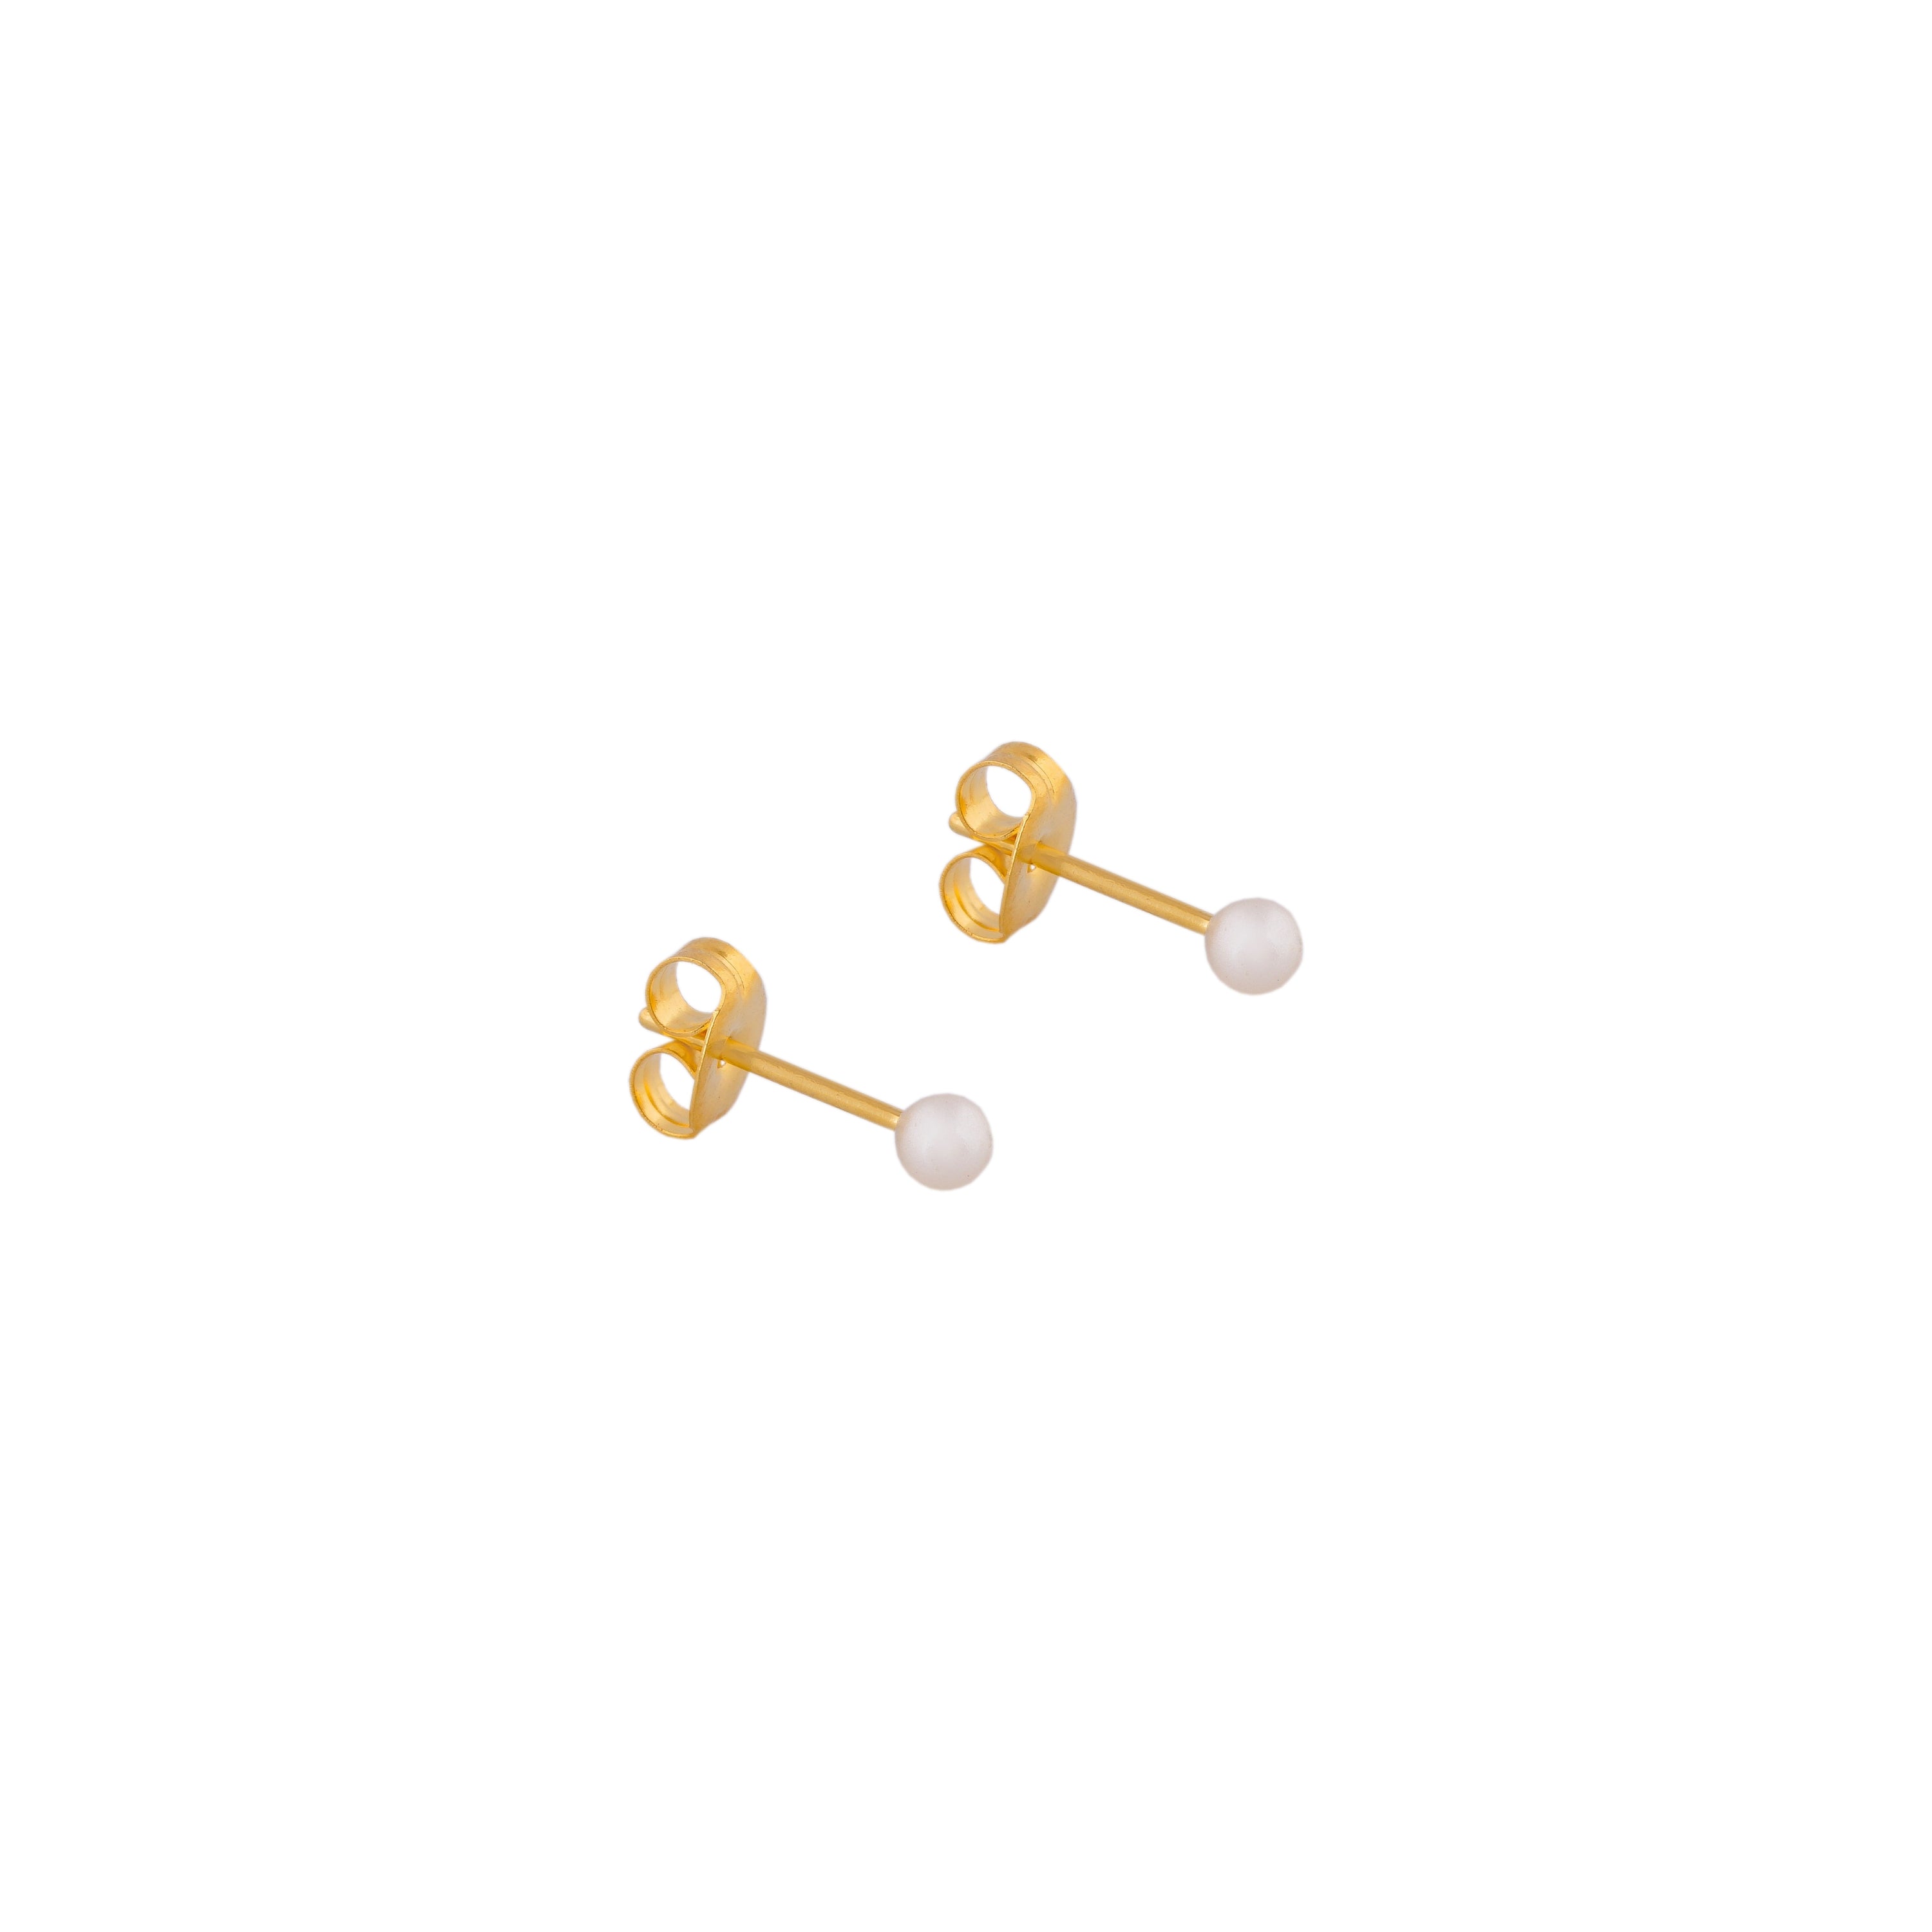 3MM White Pearl 24K Pure Gold Plated Ear Studs | MADE IN USA | Ideal for everyday wear